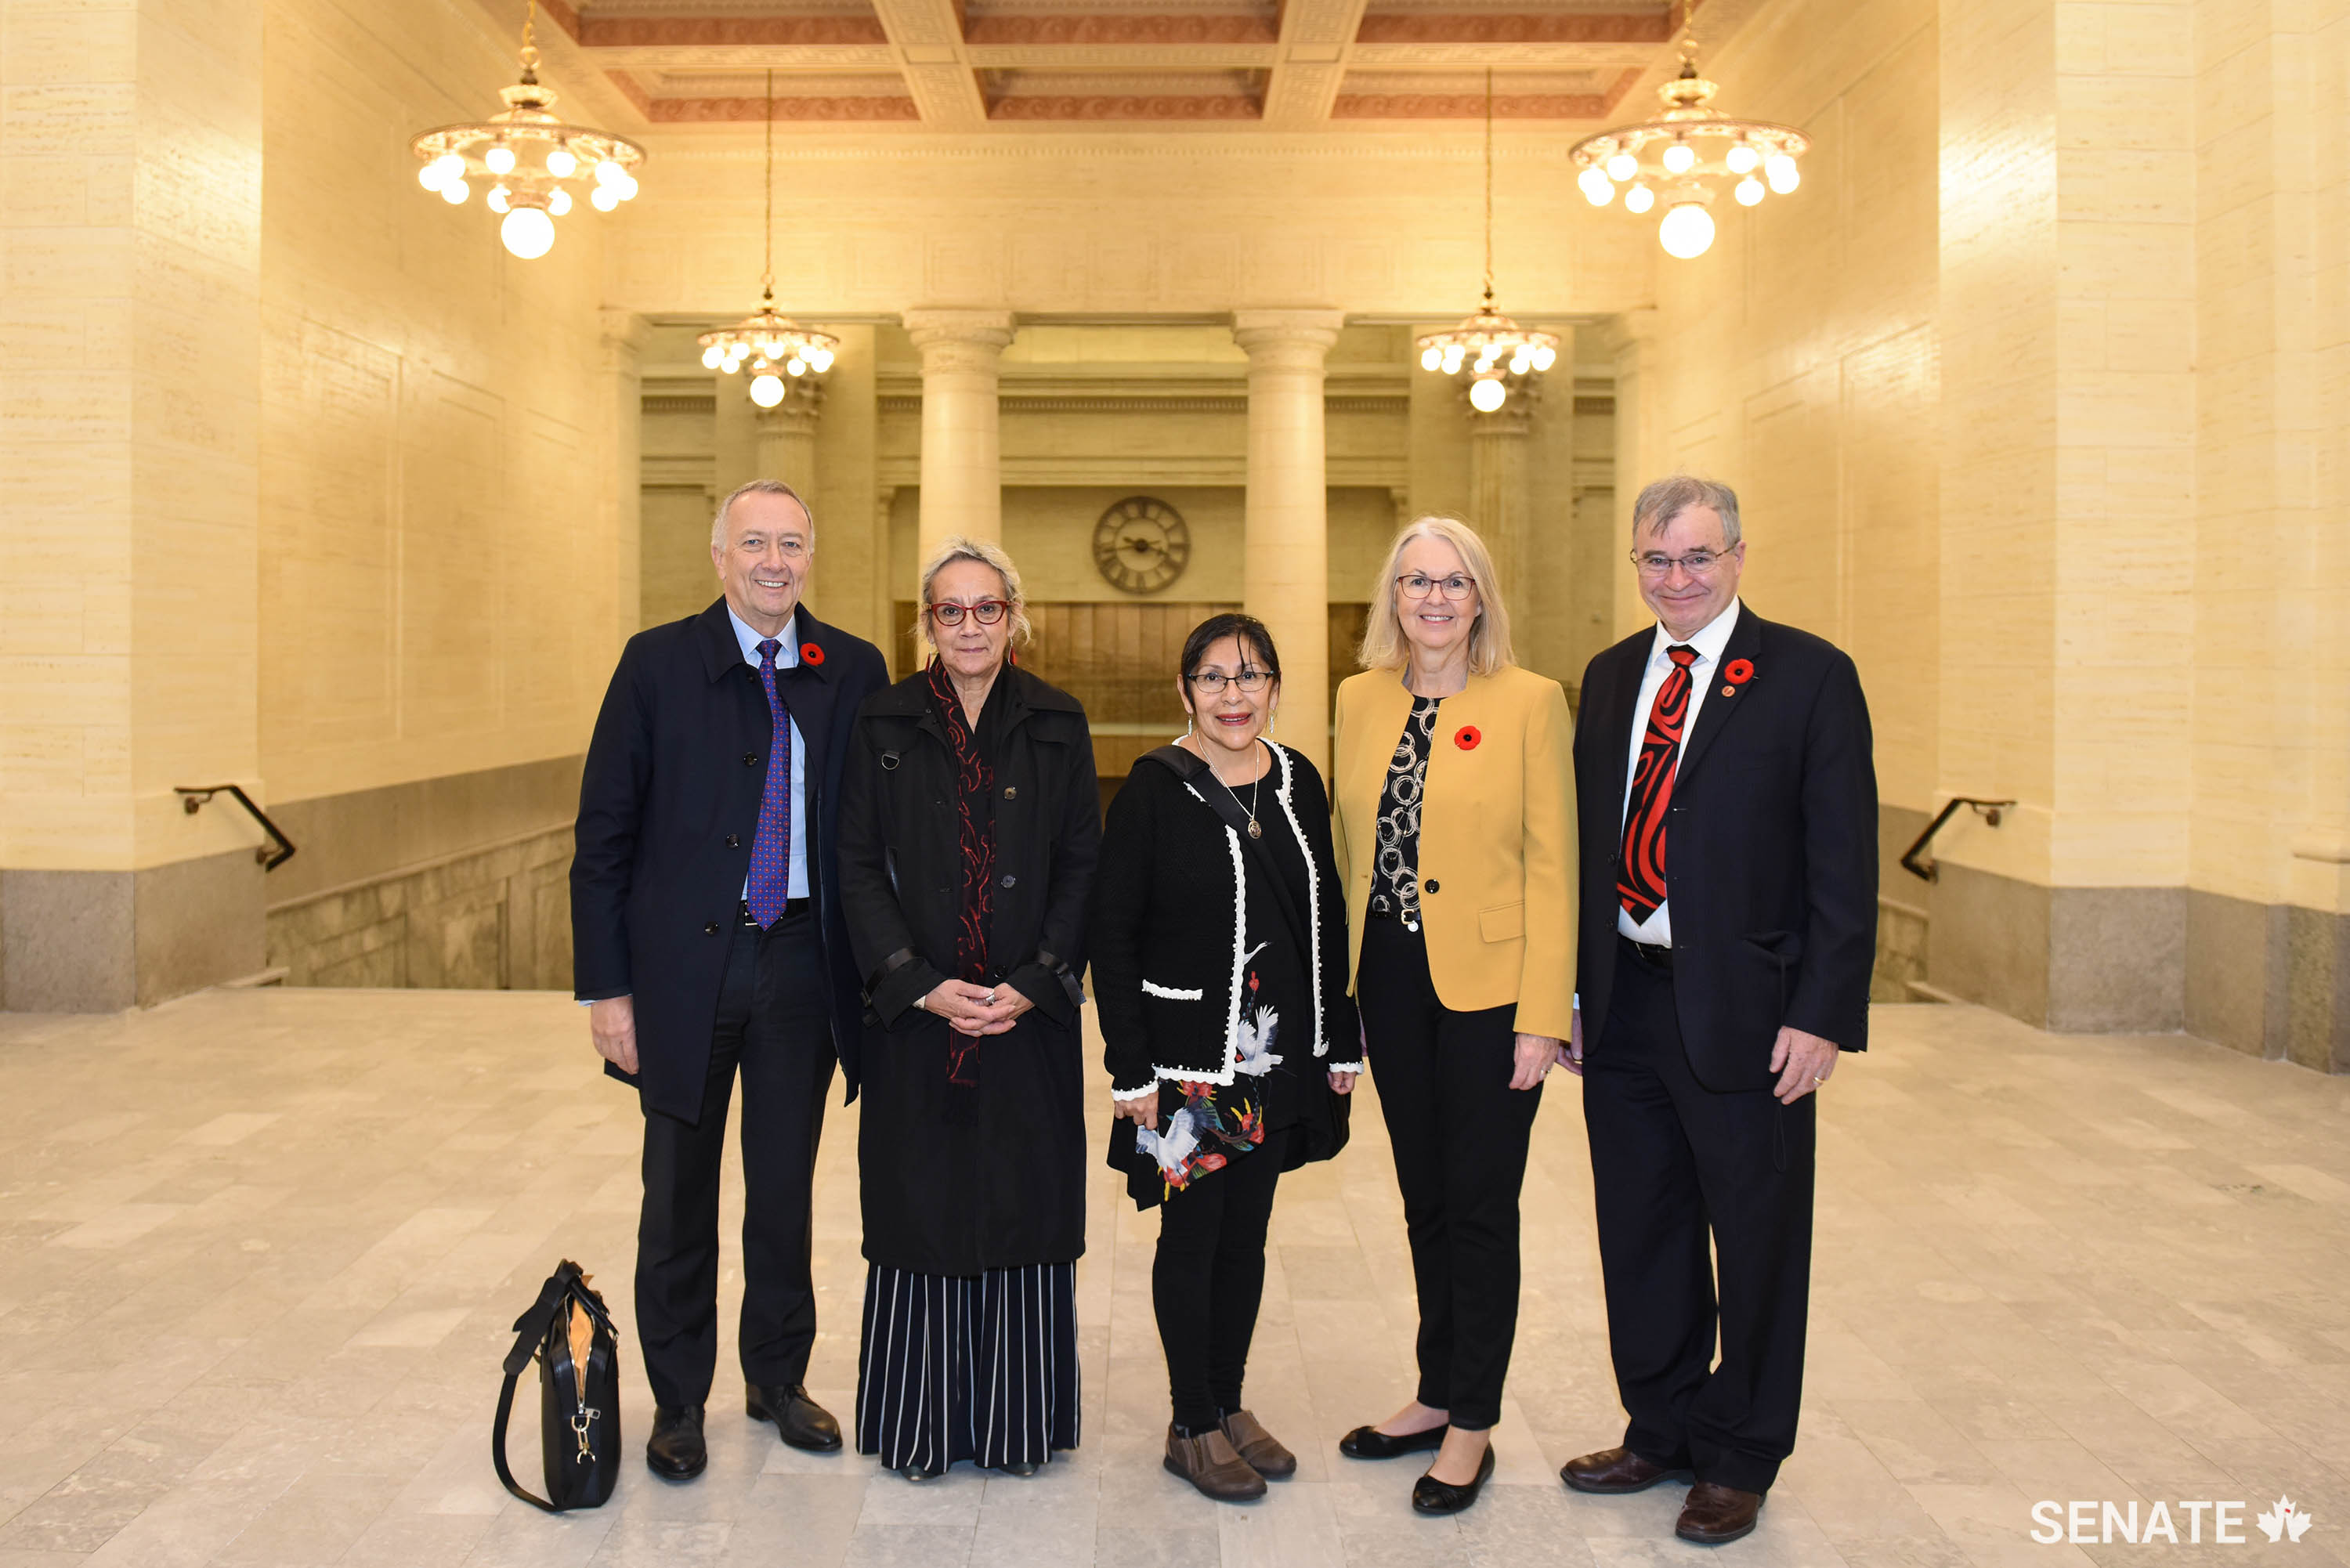 From left, Senate Committee on Energy, the Environment and Natural Resources members senators Paul J. Massicotte, Mary Jane McCallum, committee chair Rosa Galvez, Jane Cordy and Dennis Patterson tour the Senate of Canada Building to learn how this heritage building meets Green Globe sustainability standards. The tour was part of a study by the committee on the effect that transitioning to a low-carbon economy will have on Canada’s buildings.